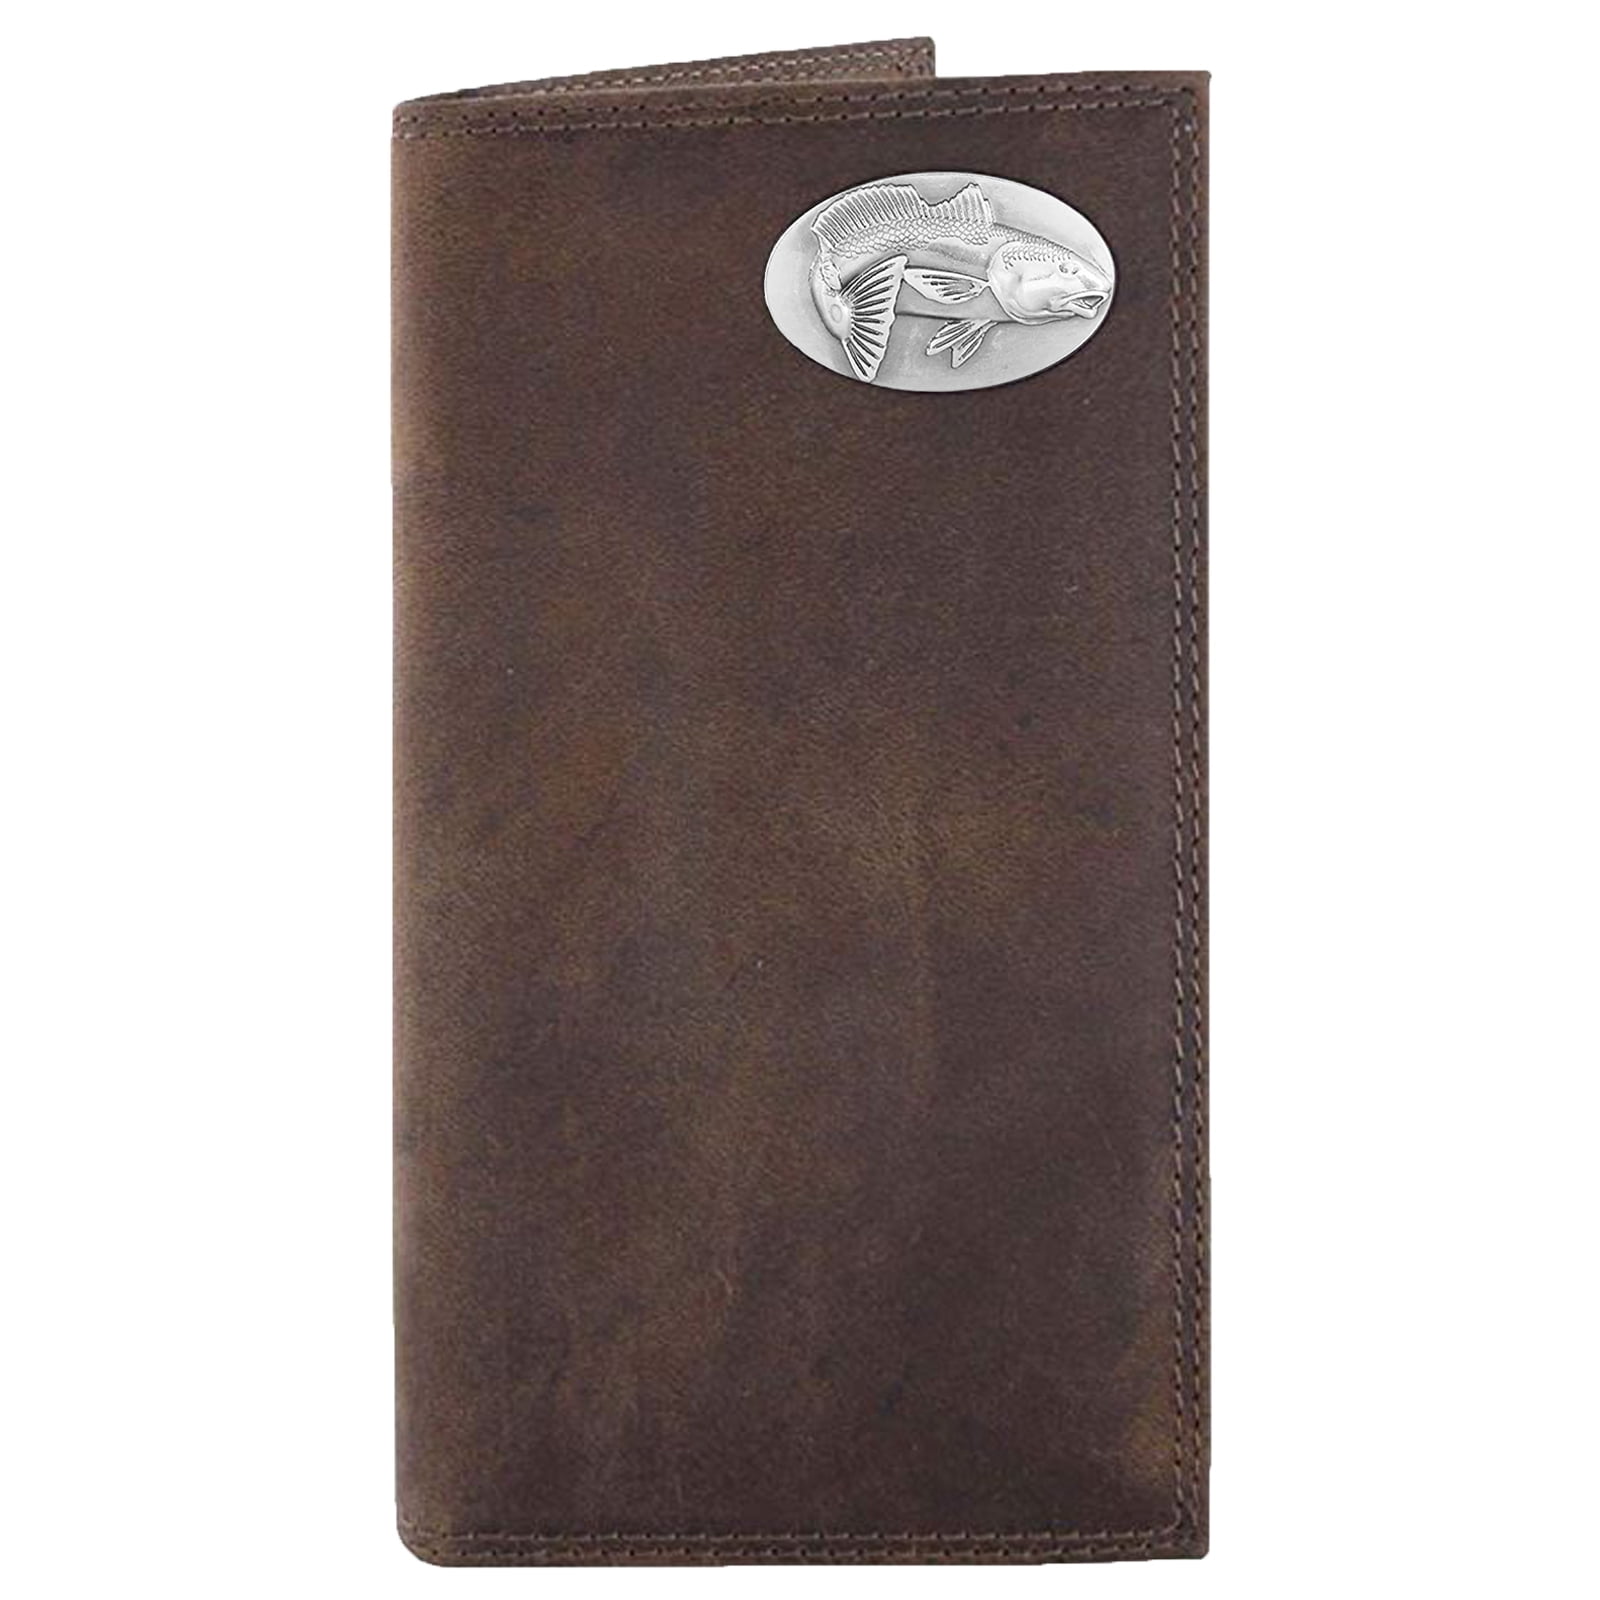 ZEP-PRO NCAA Mens Light Brown Crazyhorse Leather Roper Concho Wallet 